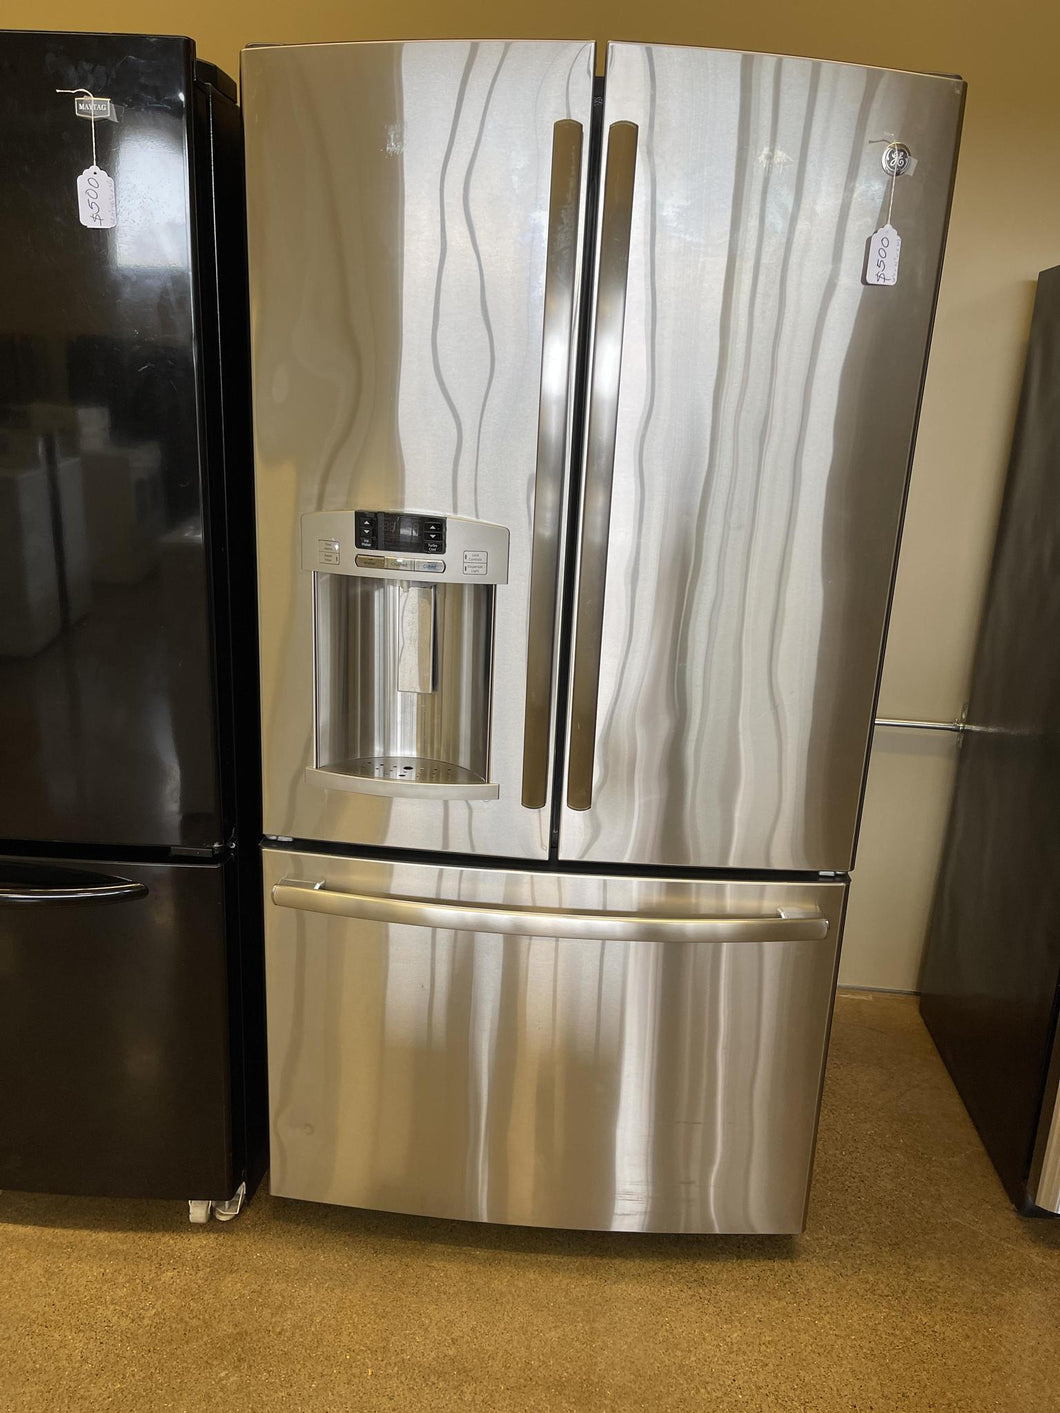 GE Stainless French Door Refrigerator - 6924